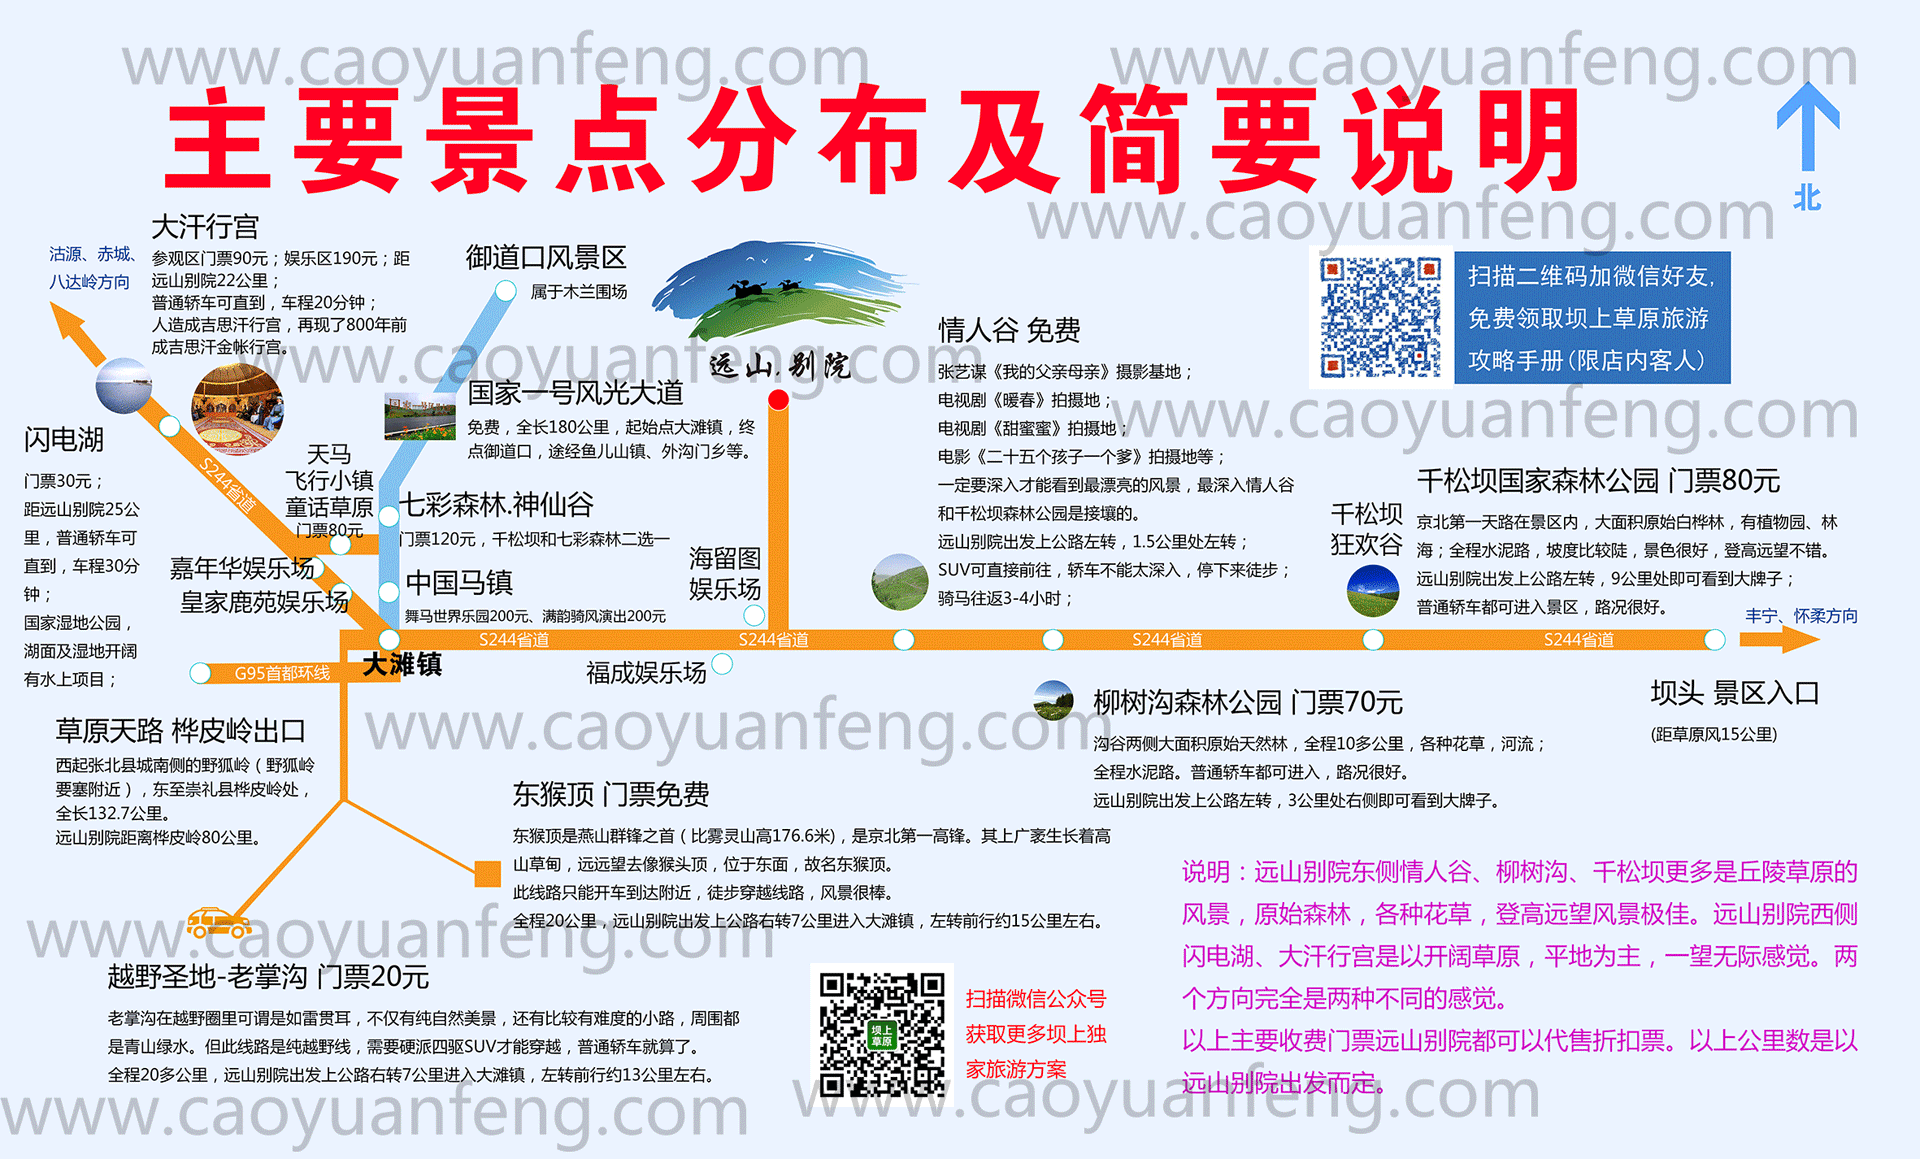  Fengning Bashang Grassland Scenic Spot Distribution Map and Detailed Description of Each Scenic Spot